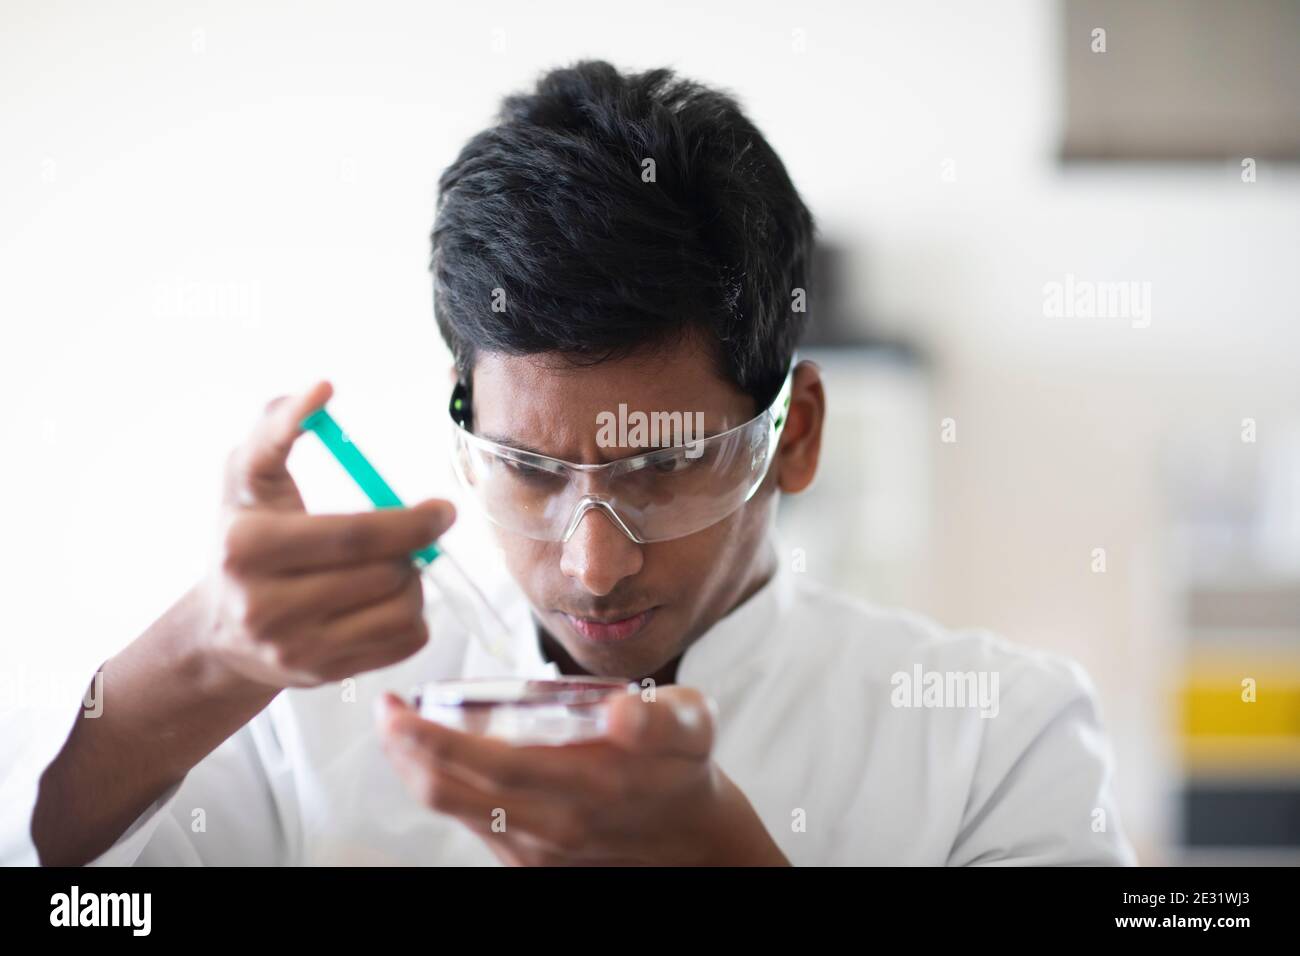 young man technician with labcoat and glasses working Stock Photo